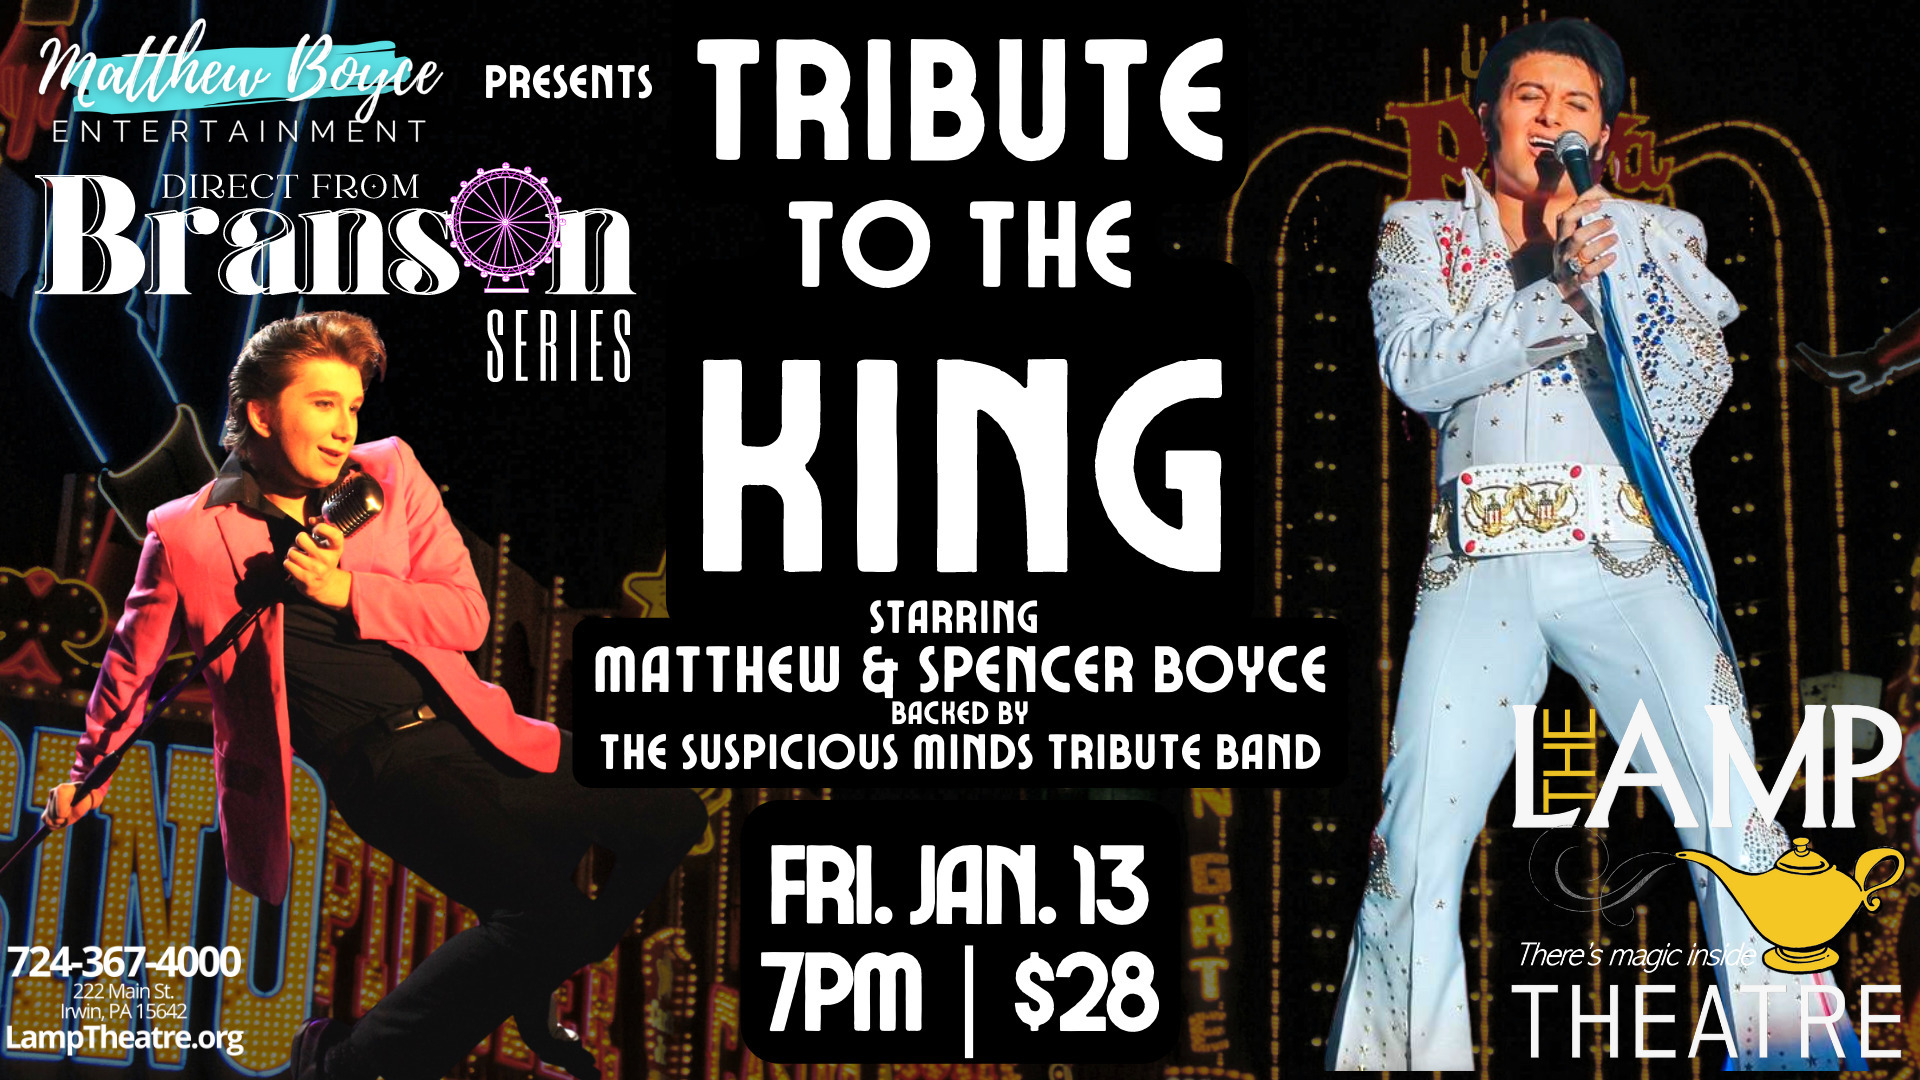 Tribute to the King: Elvis tribute starring Matthew and Spencer Boyce, Irwin, Pennsylvania, United States